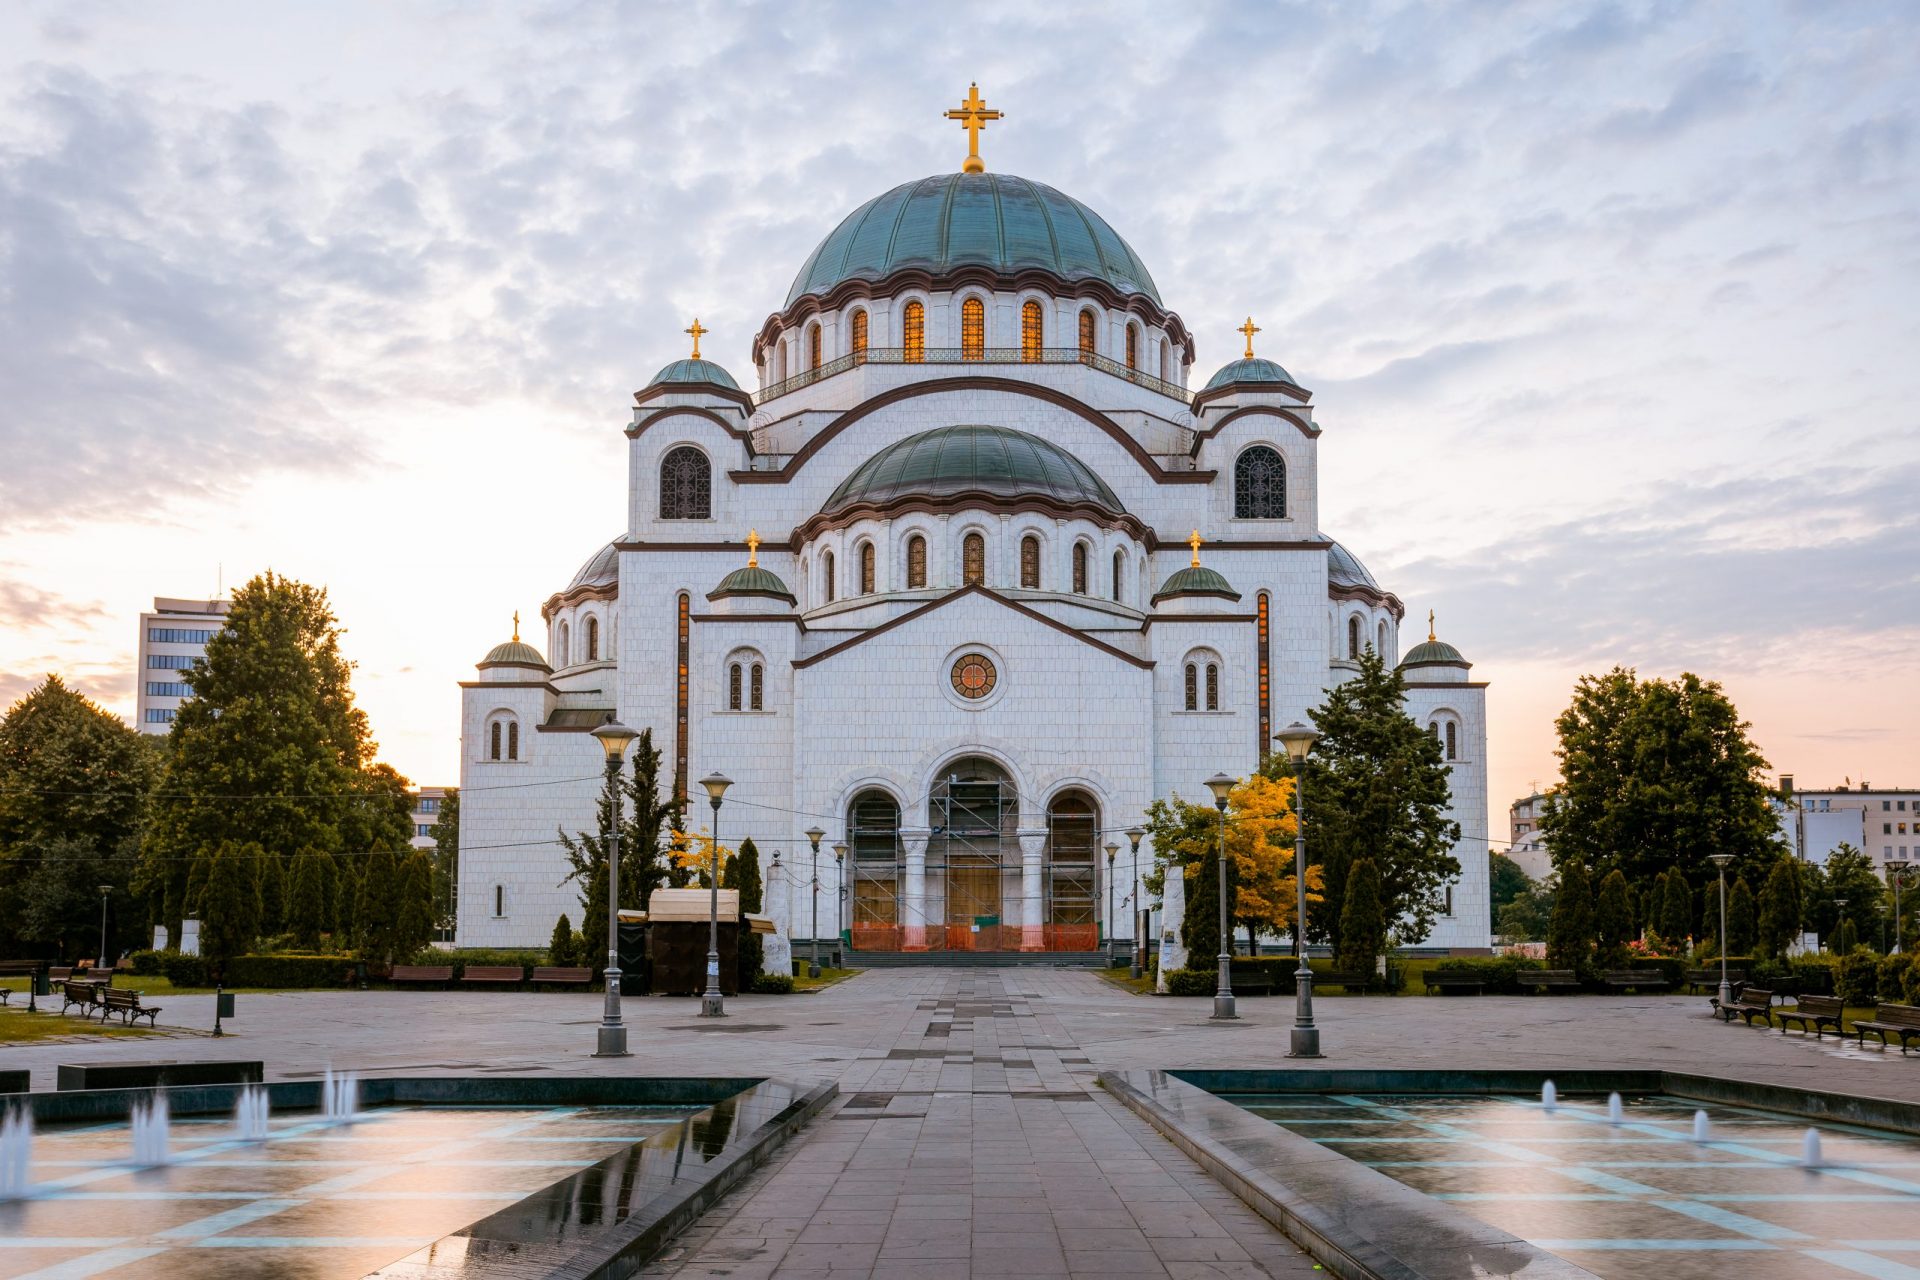 <p>Belgrade is a very interesting cosmopolitan city to discover. The capital of Serbia has various points of interest, such as the bohemian district of Skadarlija, the fortress of Kalemegdan Park, and the Saint-Bava church (photo), which is the largest Orthodox temple in the Balkans.</p>